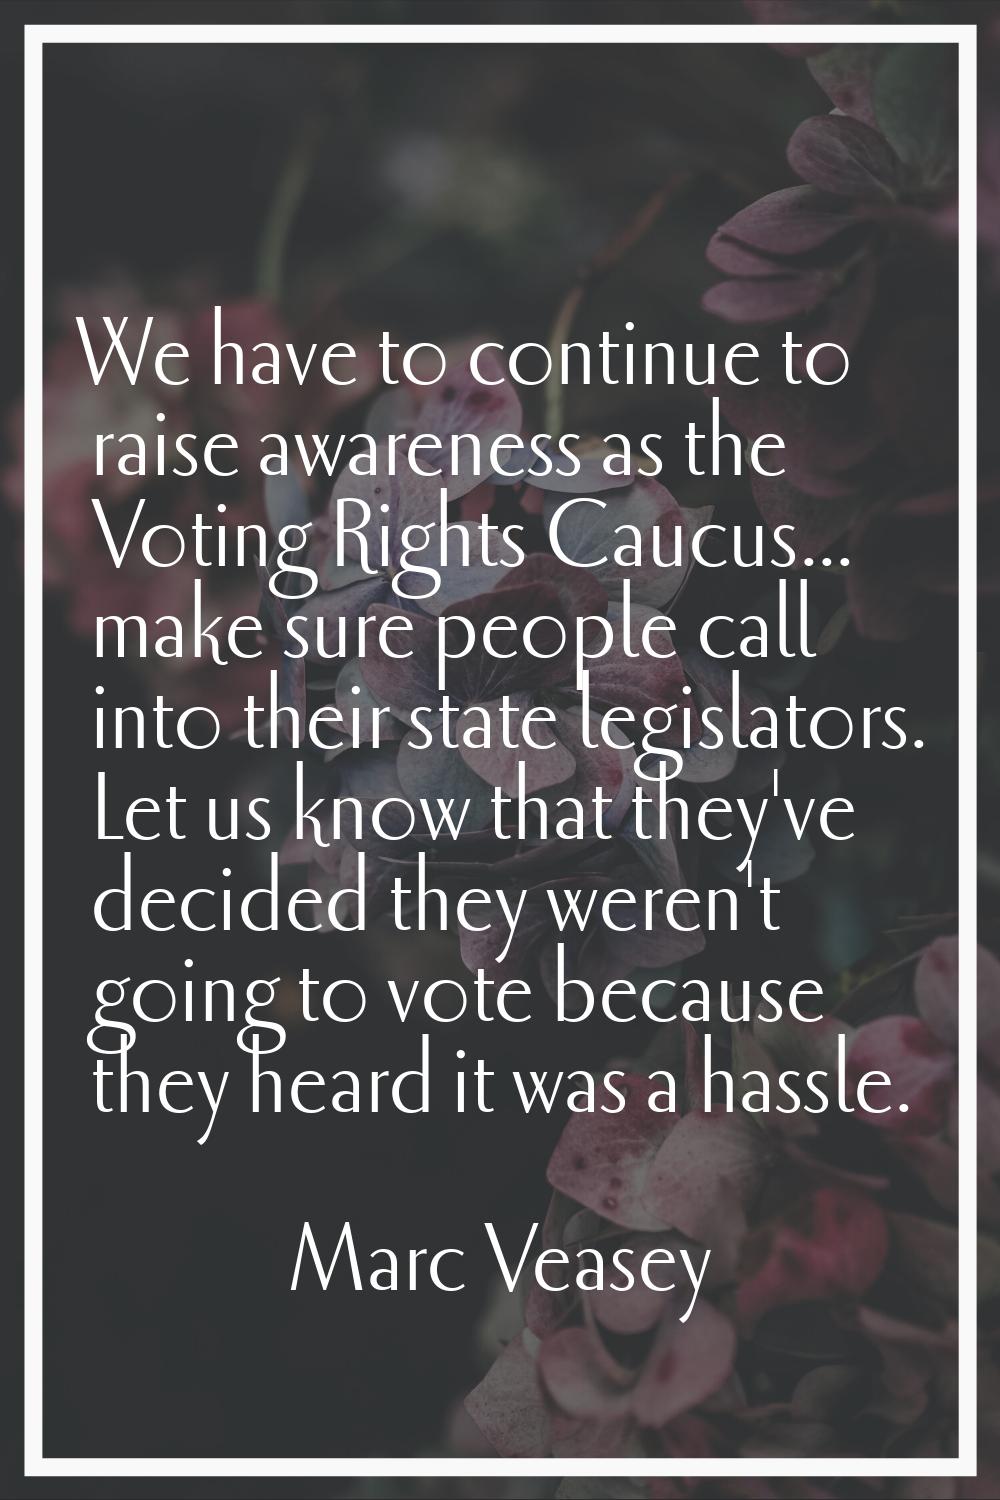 We have to continue to raise awareness as the Voting Rights Caucus... make sure people call into th